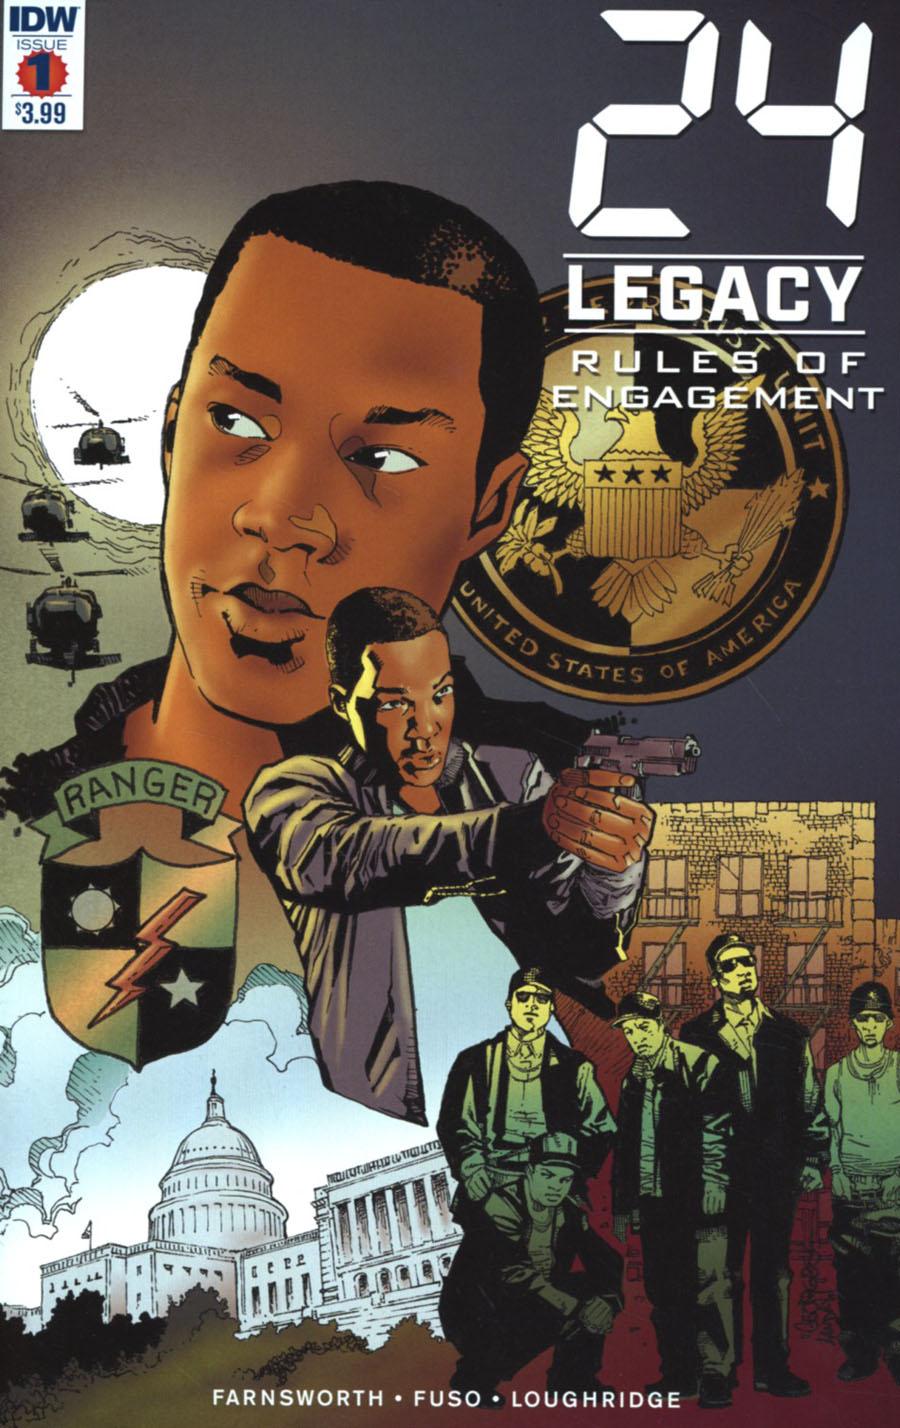 24 Legacy Rules Of Engagement Vol. 1 #1